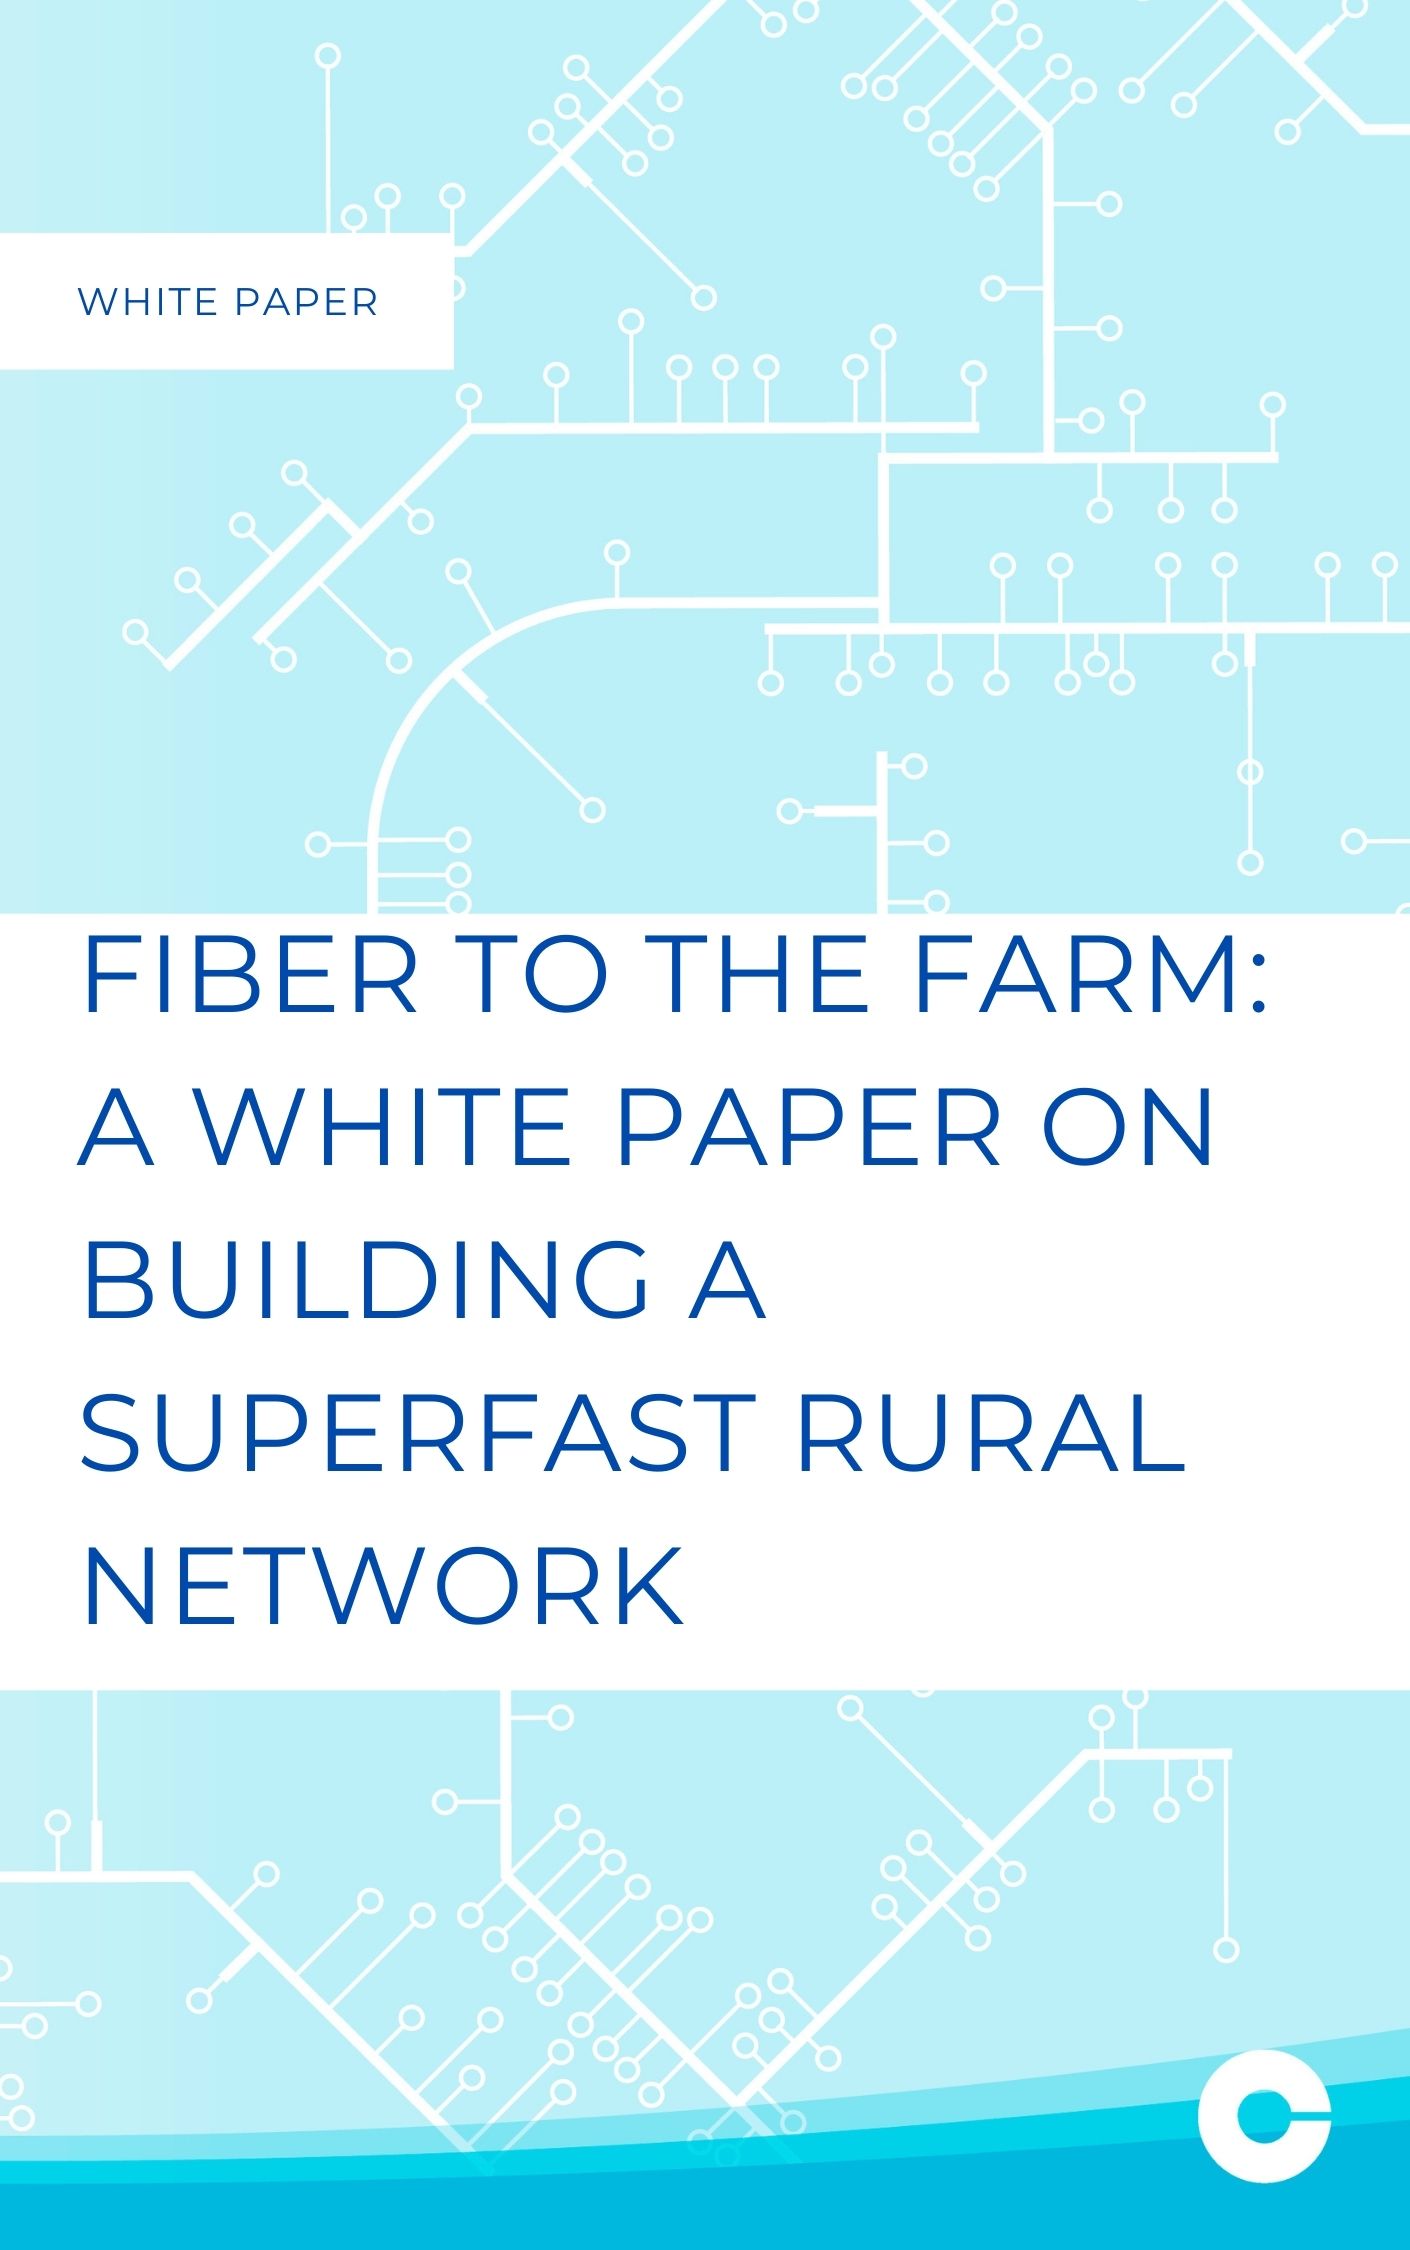 Fiber to the Farm a whitepaper on building a superfast rural network